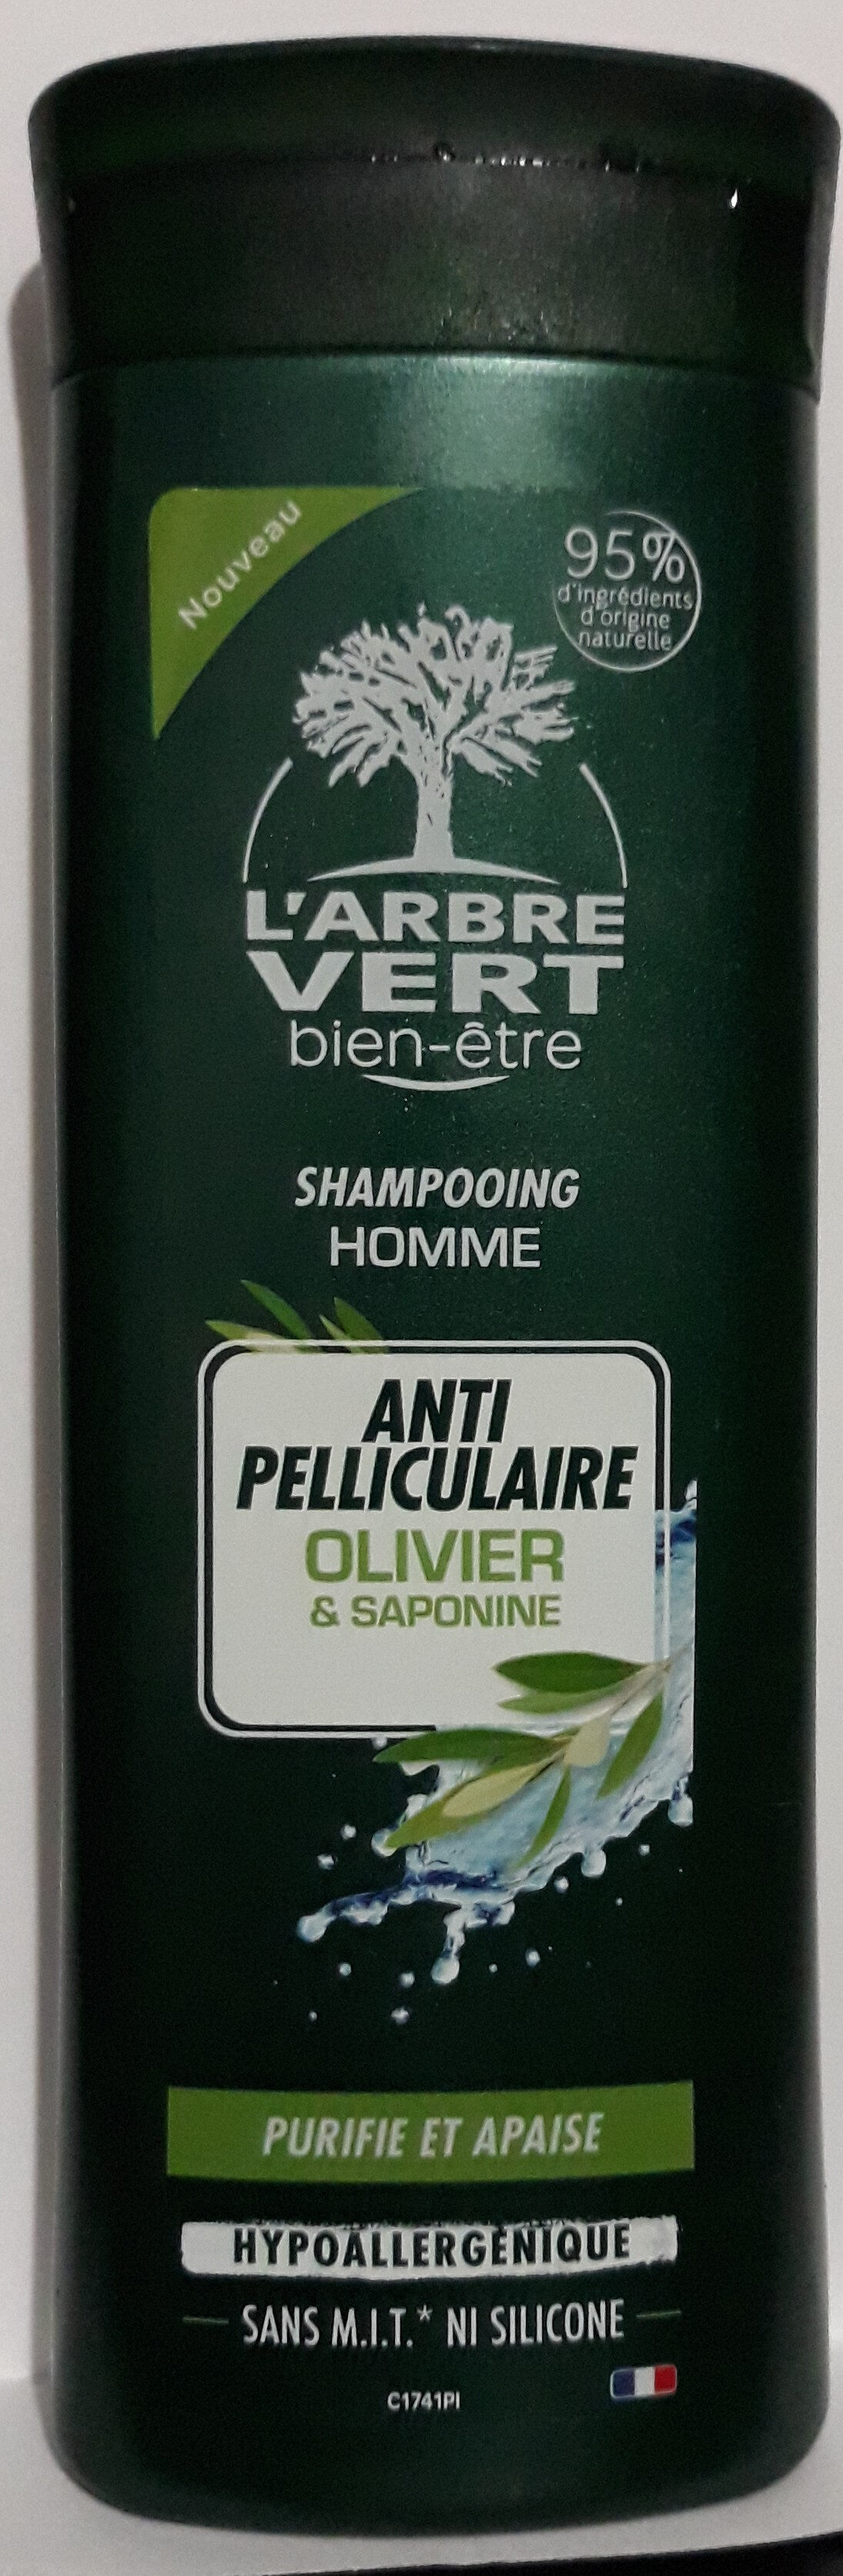 shampooing homme anti pelliculaire olivier & saponine - Produto - fr